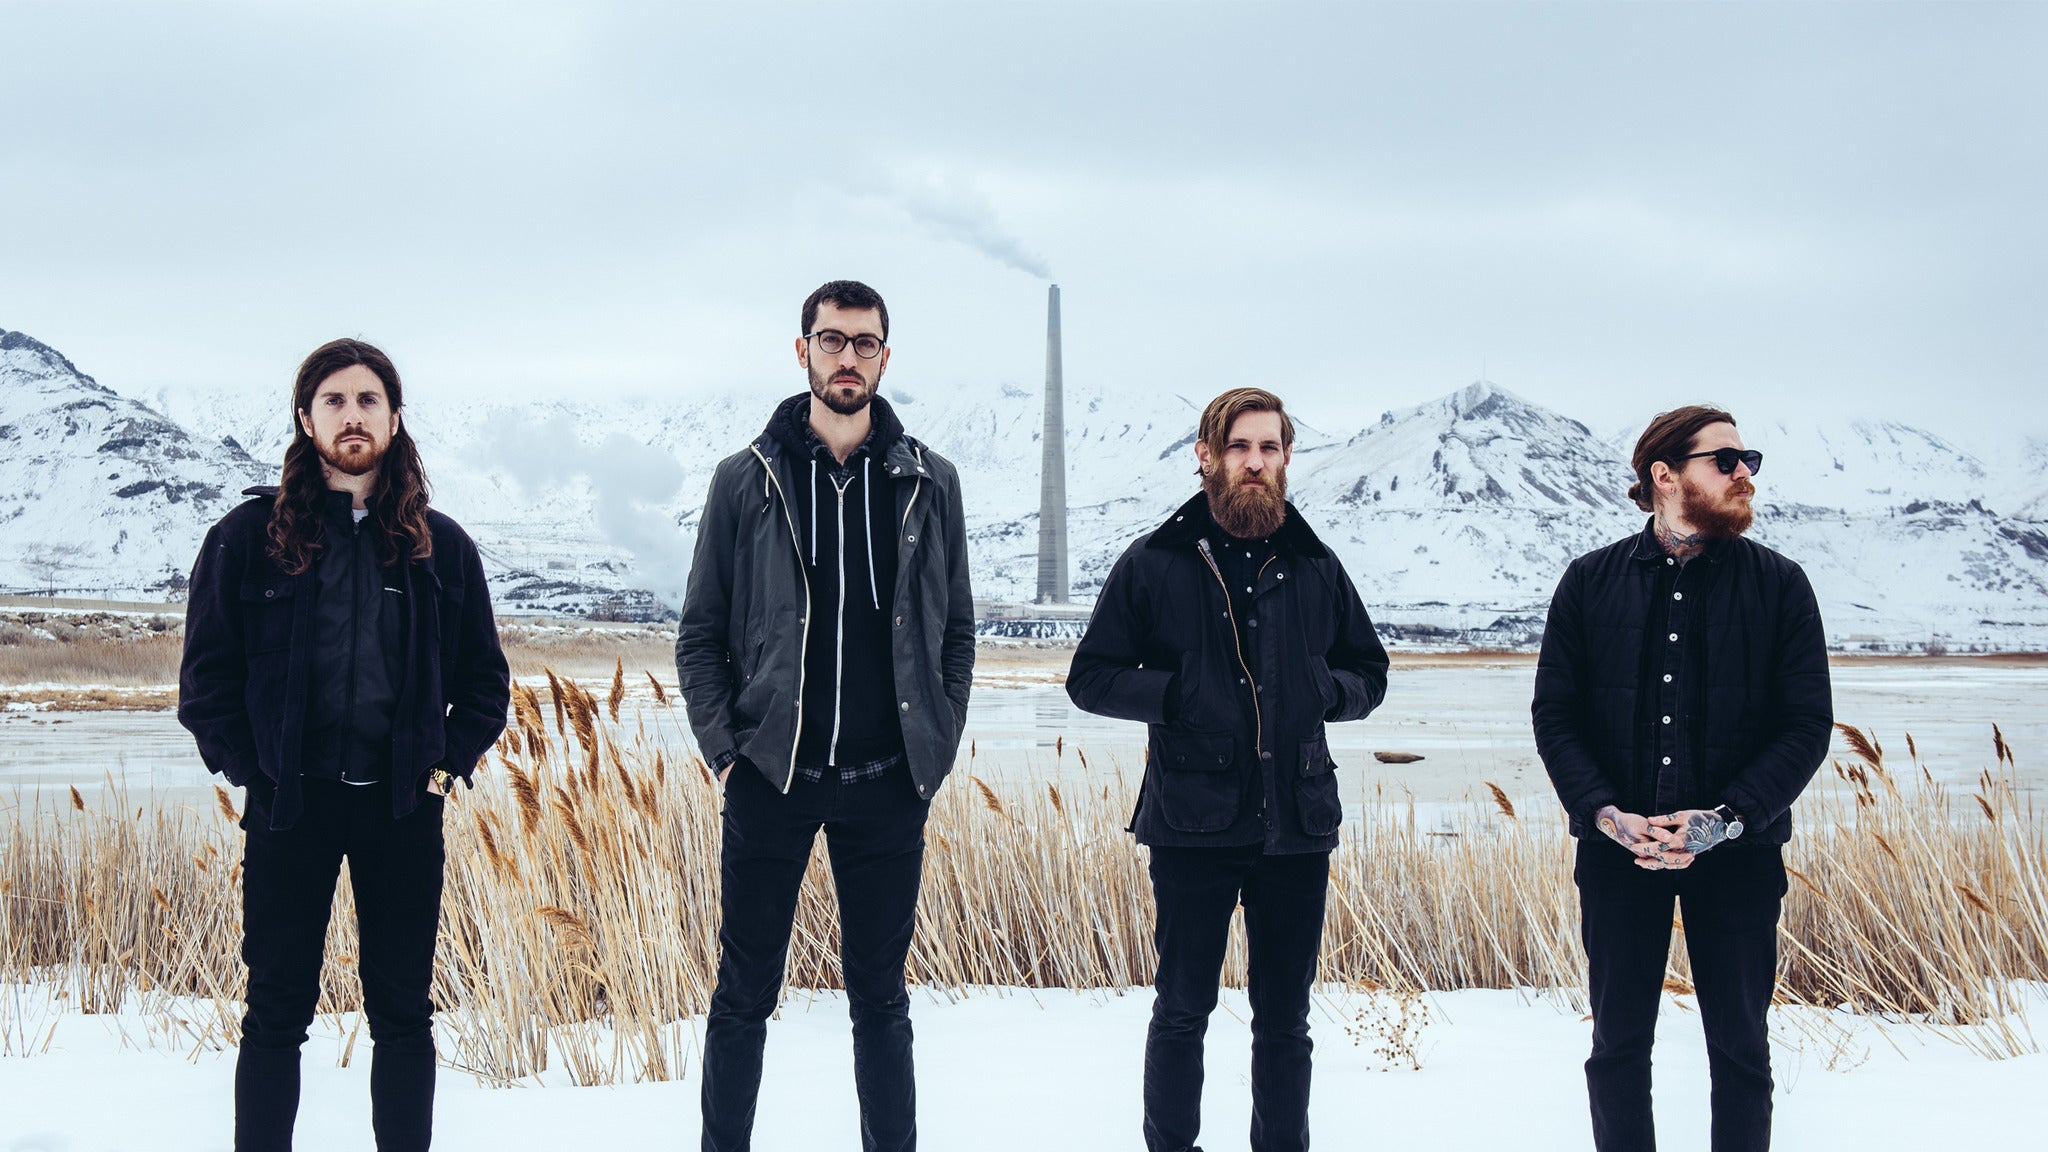 THE DEVIL WEARS PRADA ANNOUNCE ‘WITH ROOTS ABOVE AND BRANCHES BELOW’ & ‘ZOMBIE + SPACE’ LIVESTREAM EVENTS